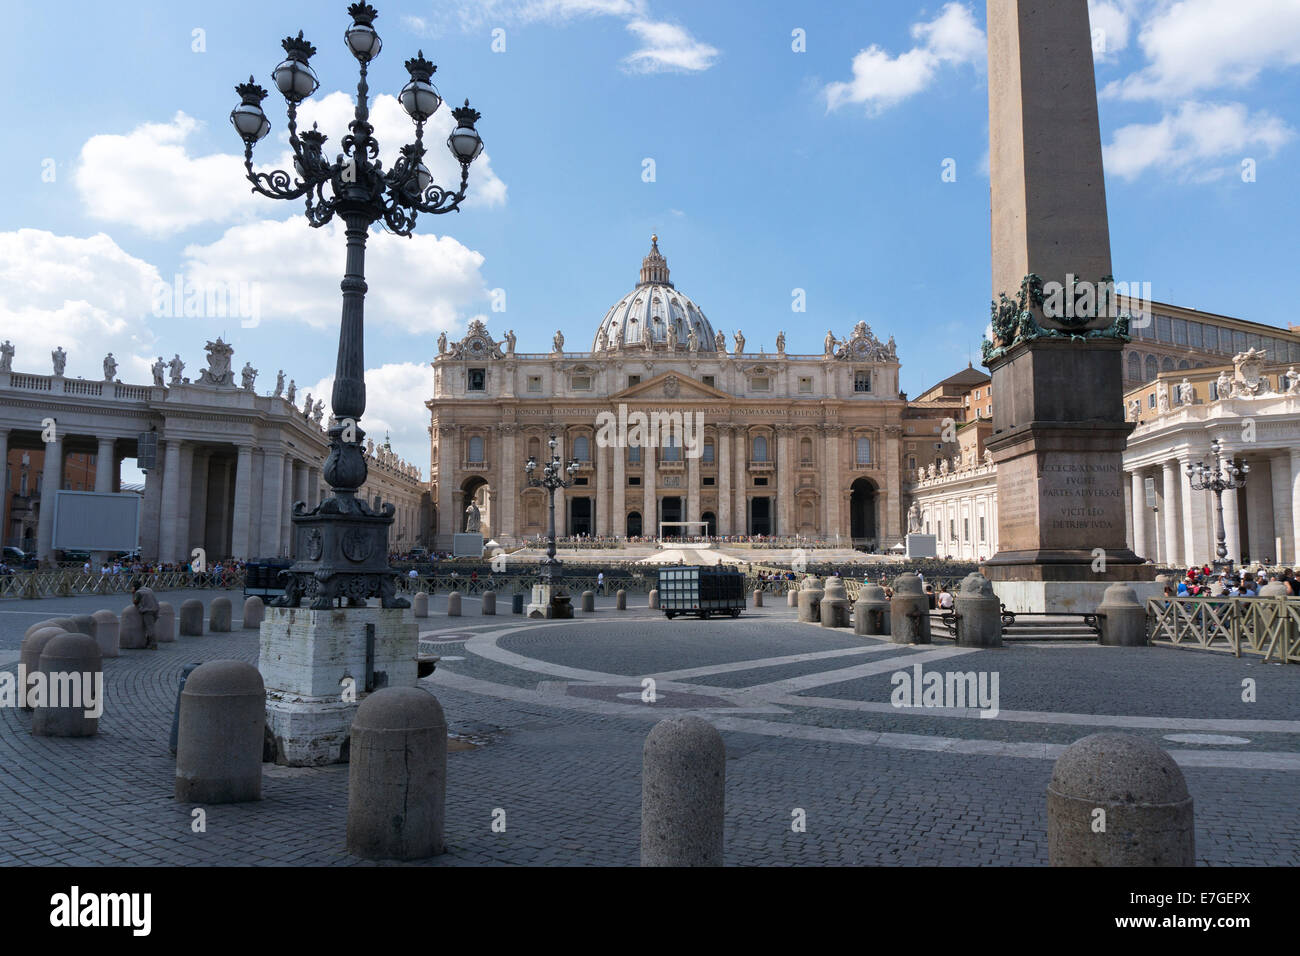 Vatican City: St. Peter's Square with Obelisk and St. Peter's Basilica. Photo from 4th September 2014. Stock Photo